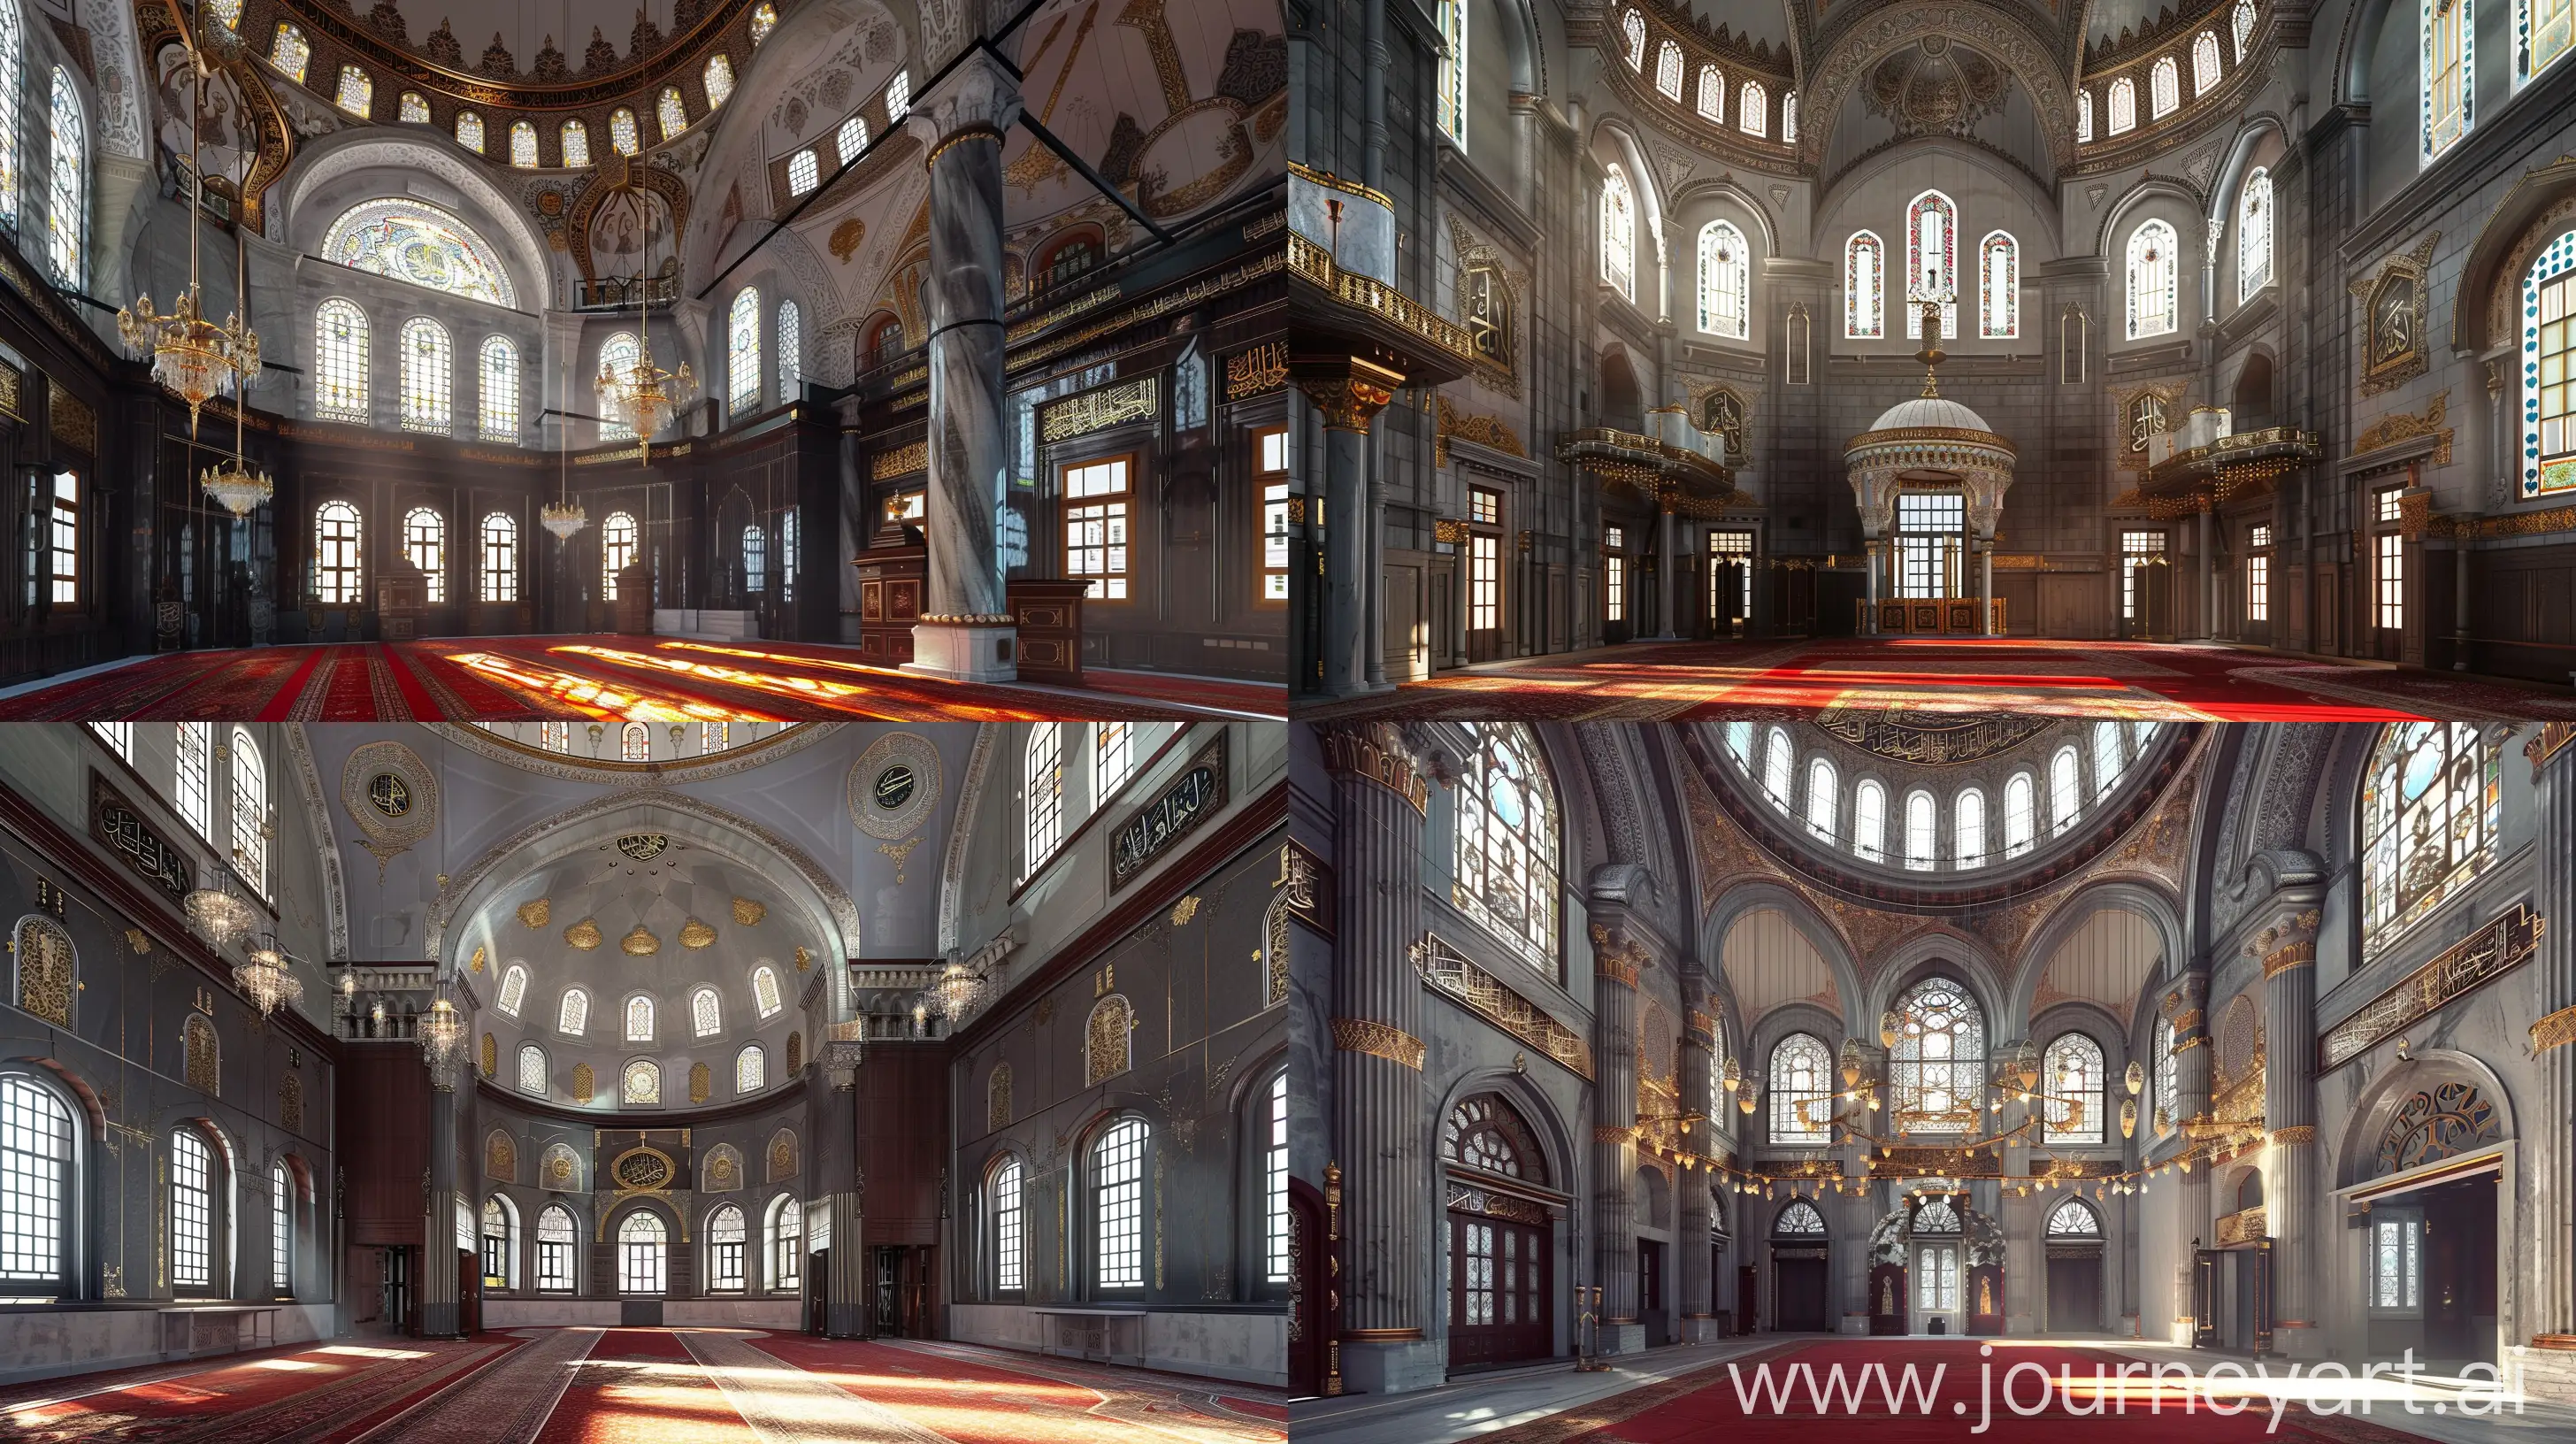 https://s.mj.run/D7JB0yAMQrc large volumetric elegant traditional drk wooden belle epoque style ottoman süleymaniye mosque in baroque style with baroque pattern paintings on walls with ceiligs and ornate wooden and marble baroque carvings, with beautiful red carpet floor, elegant ottoman baroque mosque filled with dark baroque pattern decoration in monumental traditional dark wooden architecture ottoman mosque, Architecture of baroque imperial Budapest with beautiful dark baroque style pattern on walls and dome, beautiful eclectic, beaux-arts classical and japanese elements, large ornate windows with beautiful light coming through, beautiful ornate wood, clean lines, photorealistic, 8k, --ar 16:9 --v 6.0